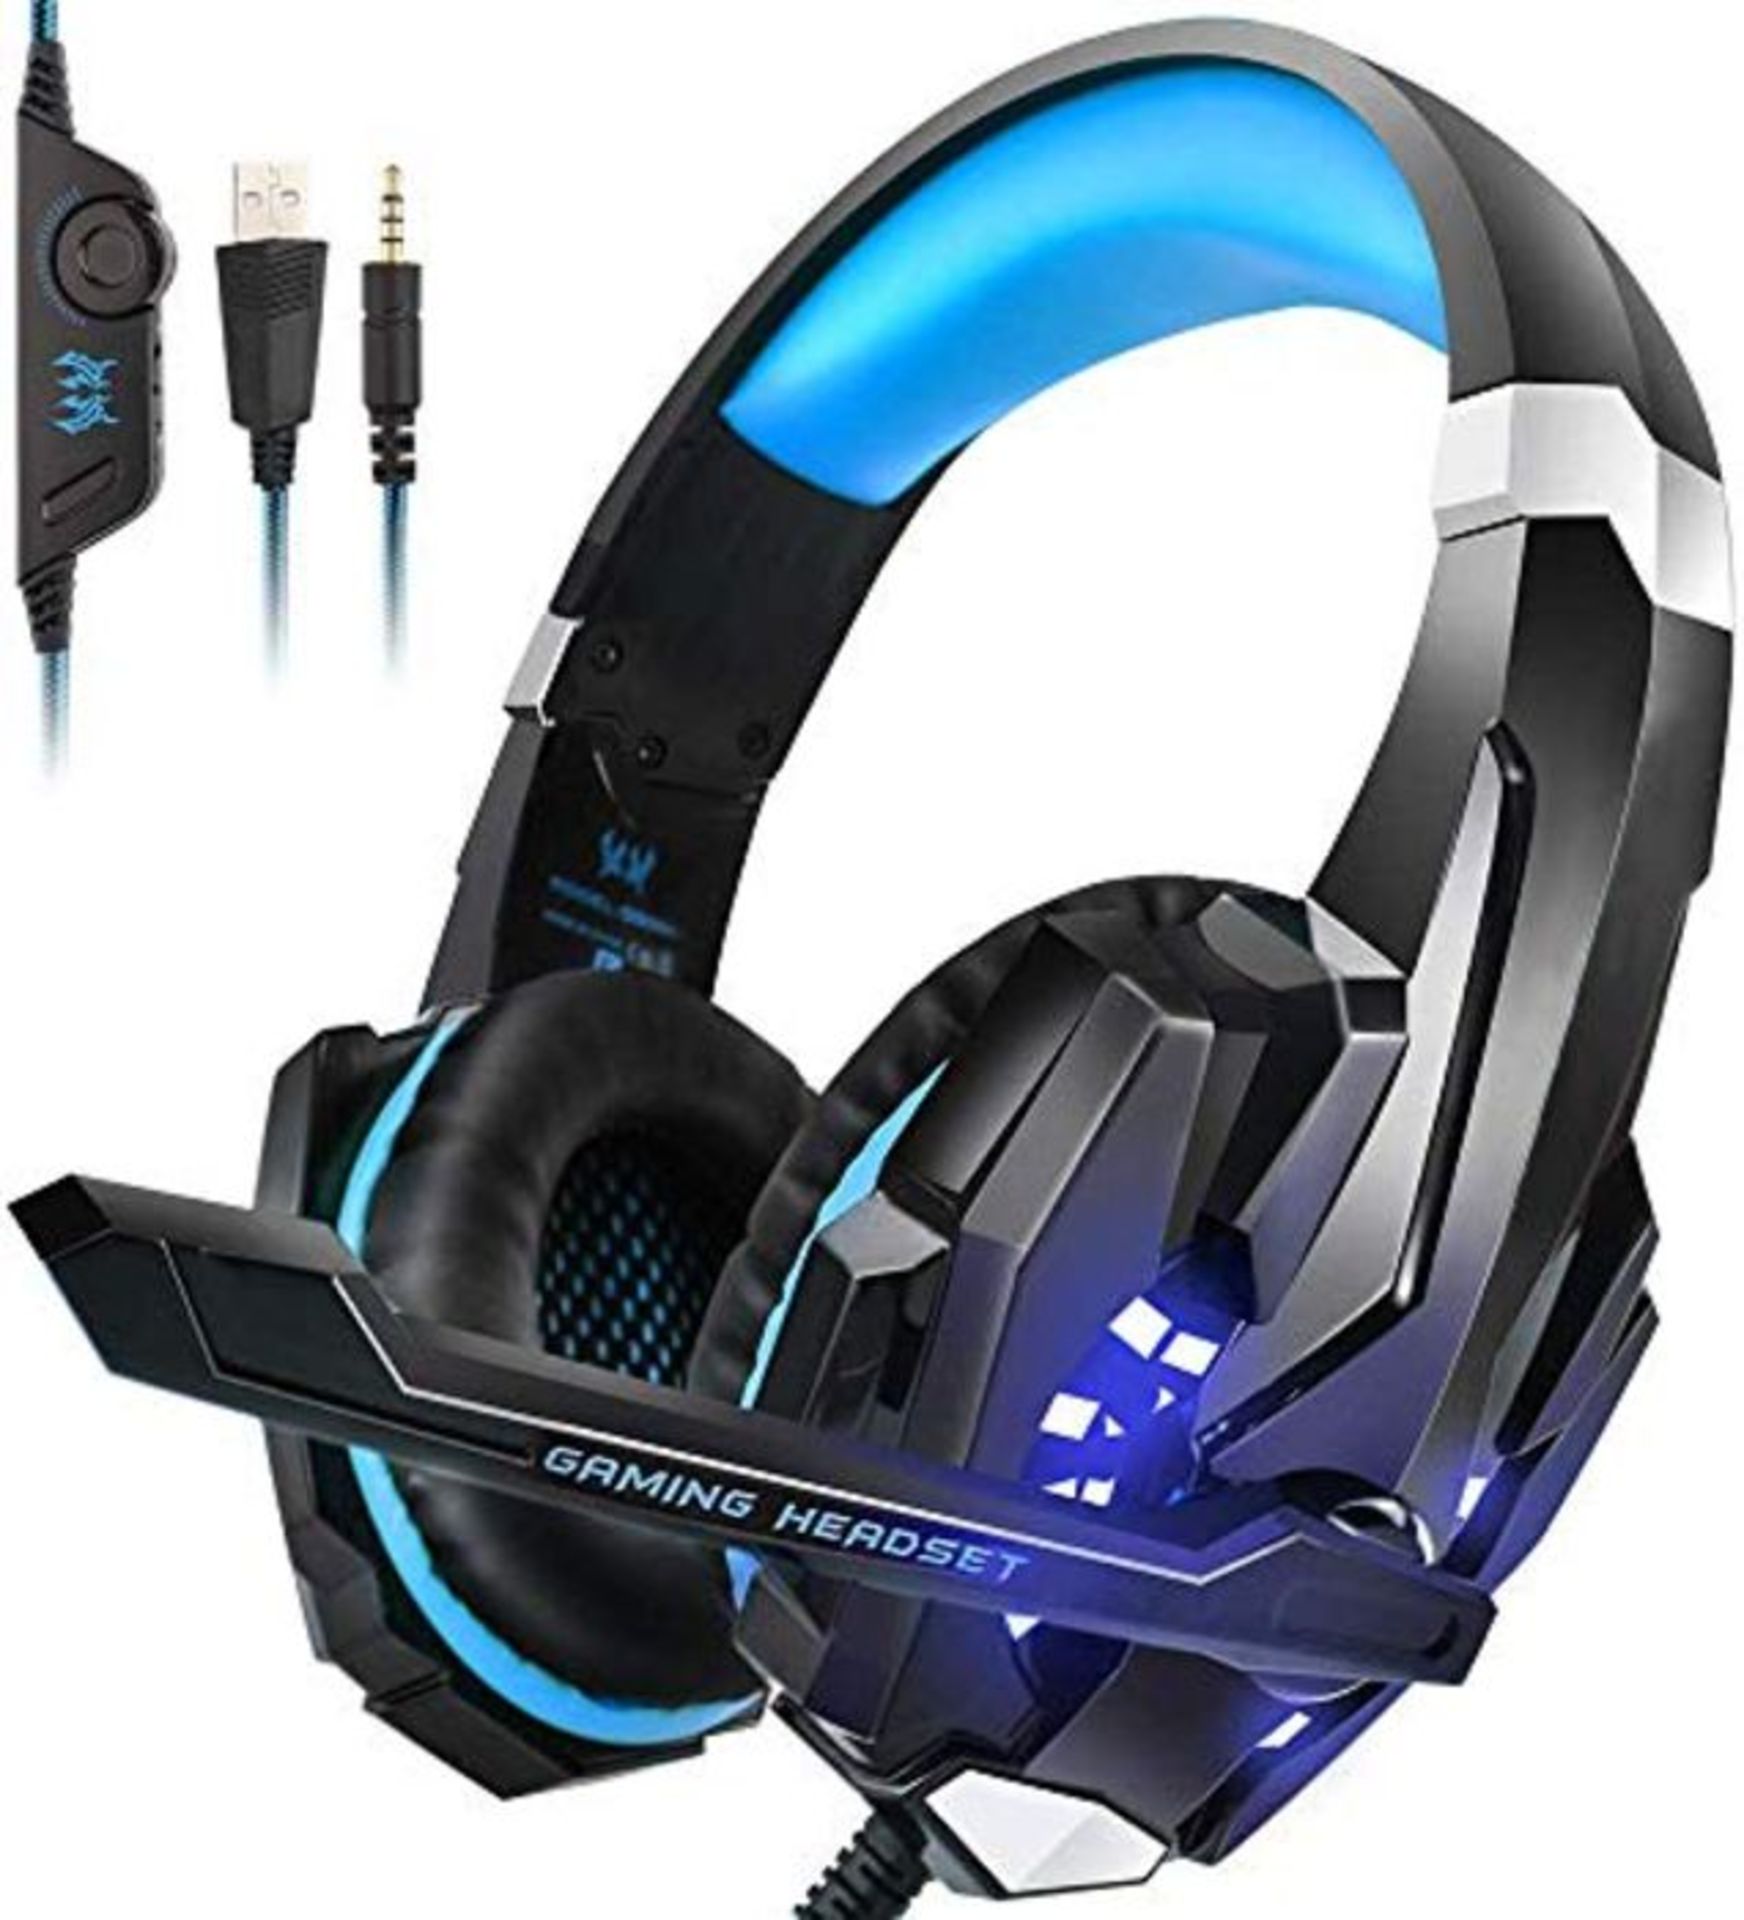 PS4 Headset, INSMART PC Gaming Headset Over-Ear Gaming Headphones with Mic LED Light N